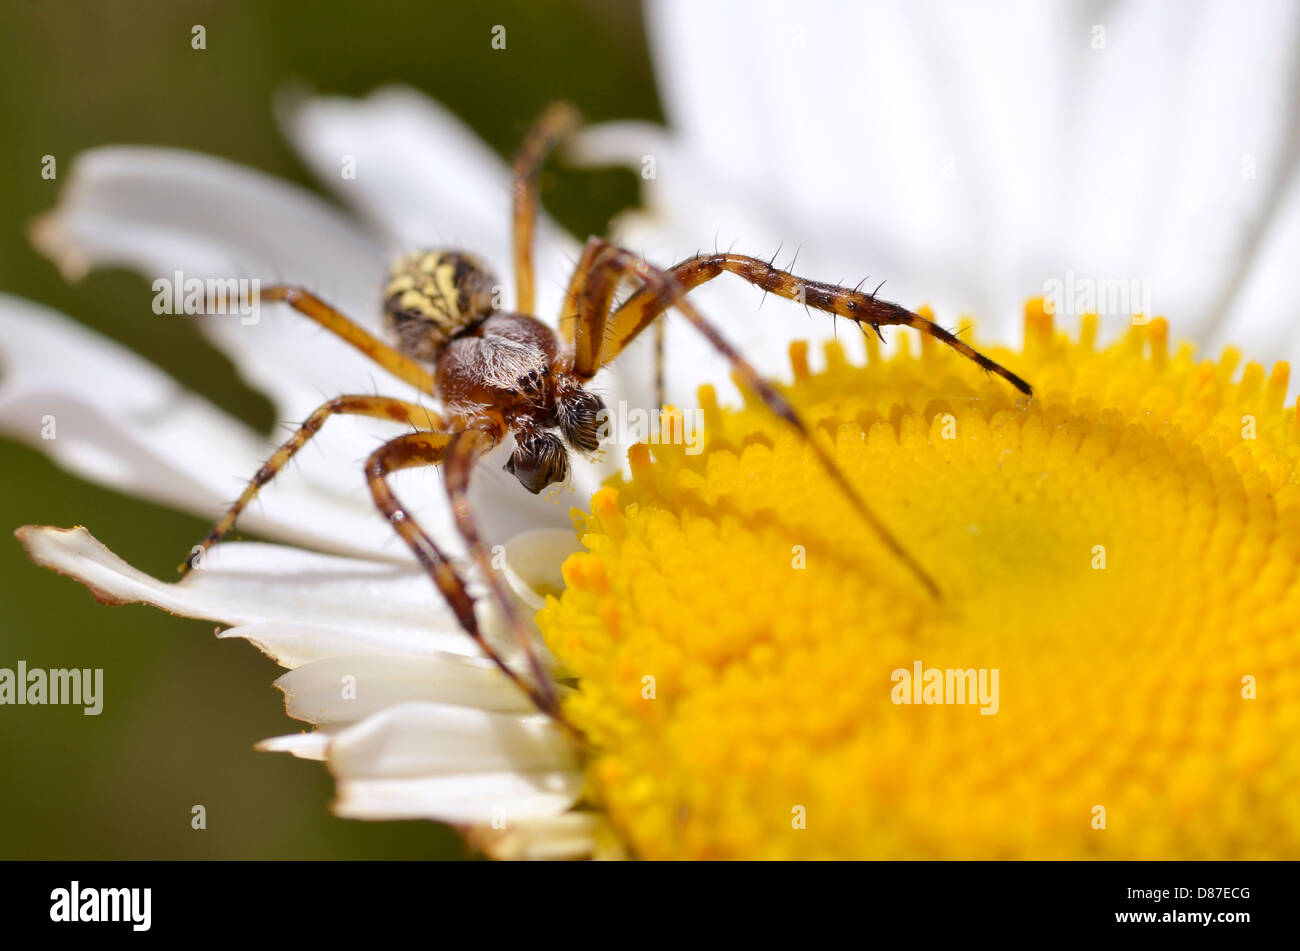 Macro of spider with big palps, on the yellow heart of daisy flower Stock Photo